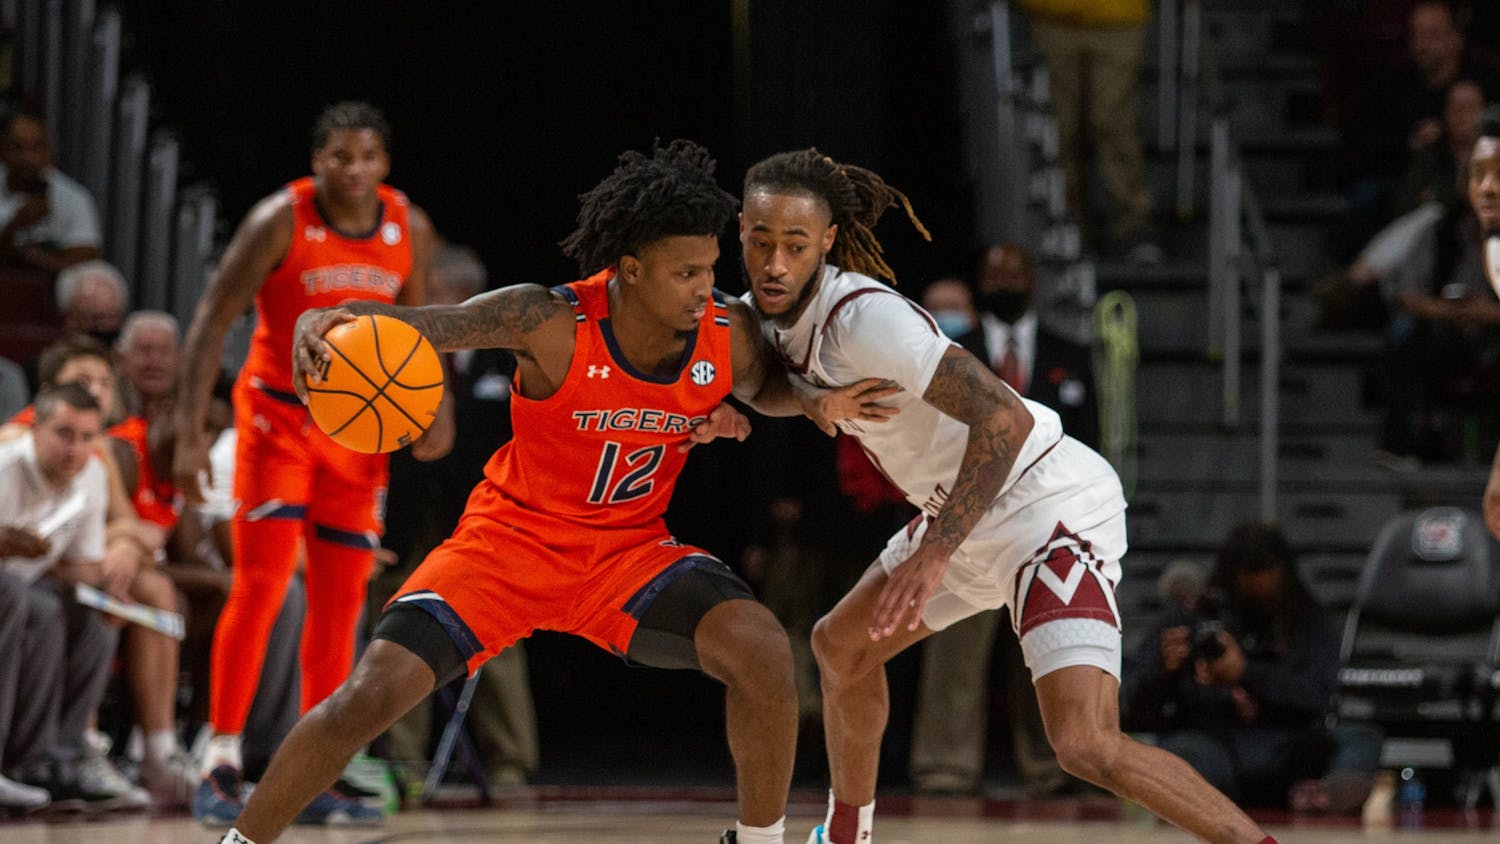 Graduate guard James Reese V works to cover his opponent in a game against Auburn earlier this season. Reese was the only player to score double digits against Tennessee.&nbsp;